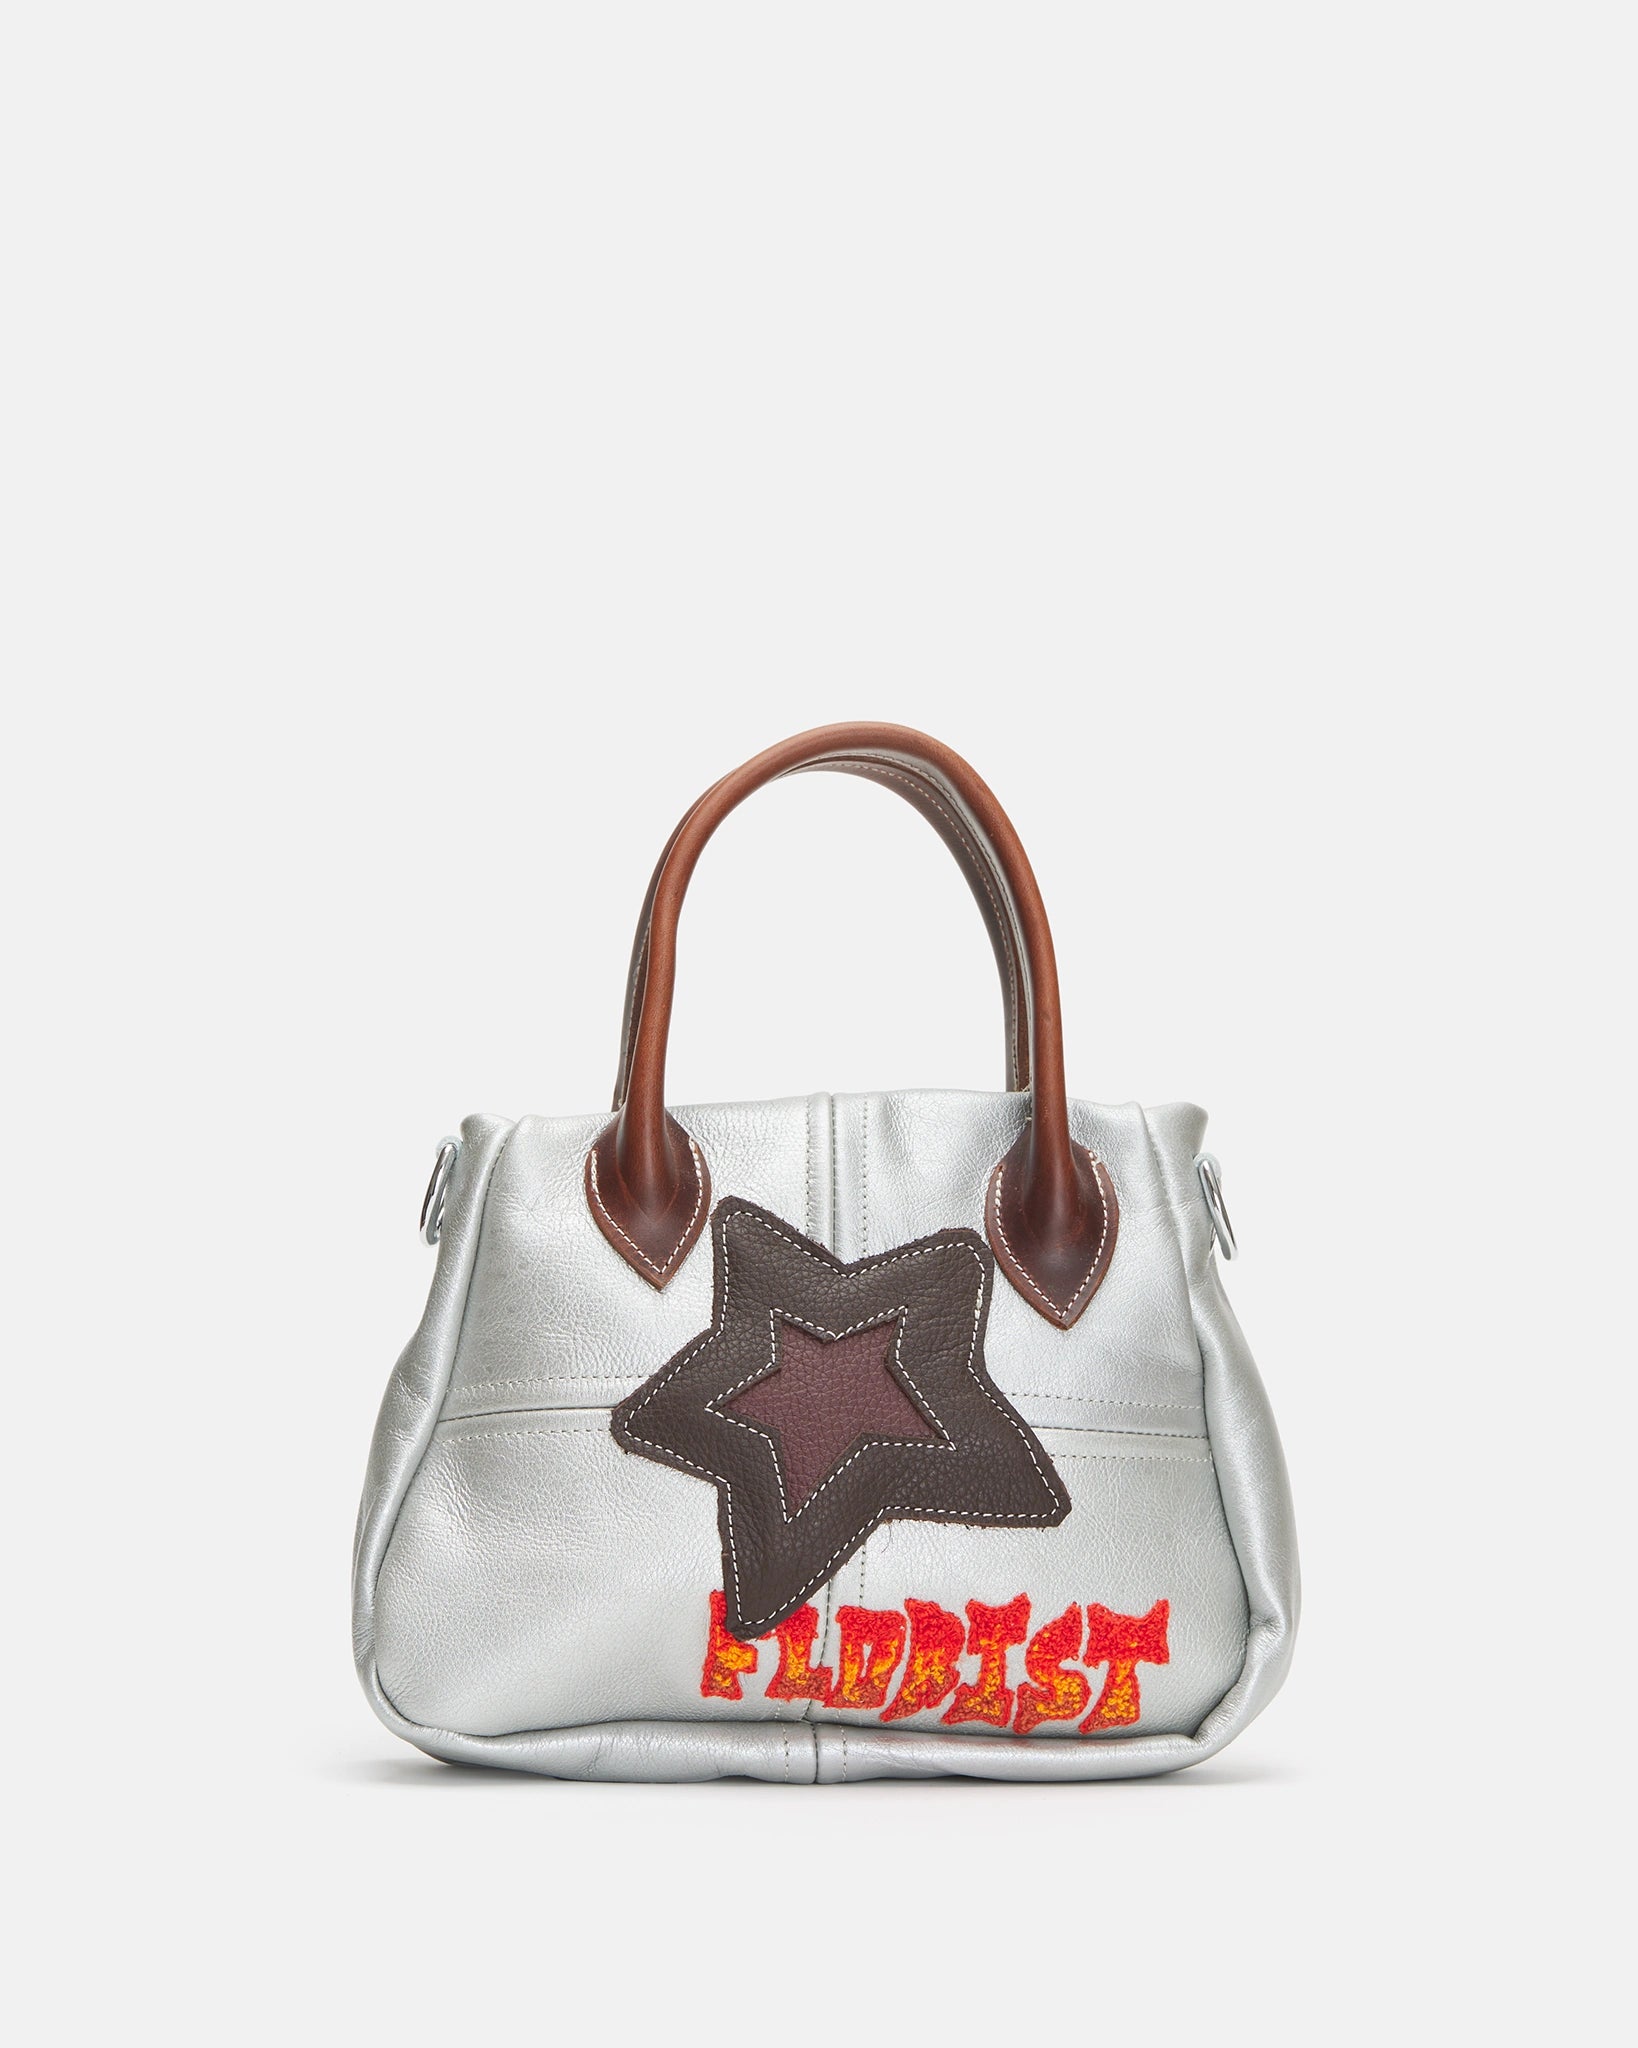 Star Baby Bag in Silver Leather